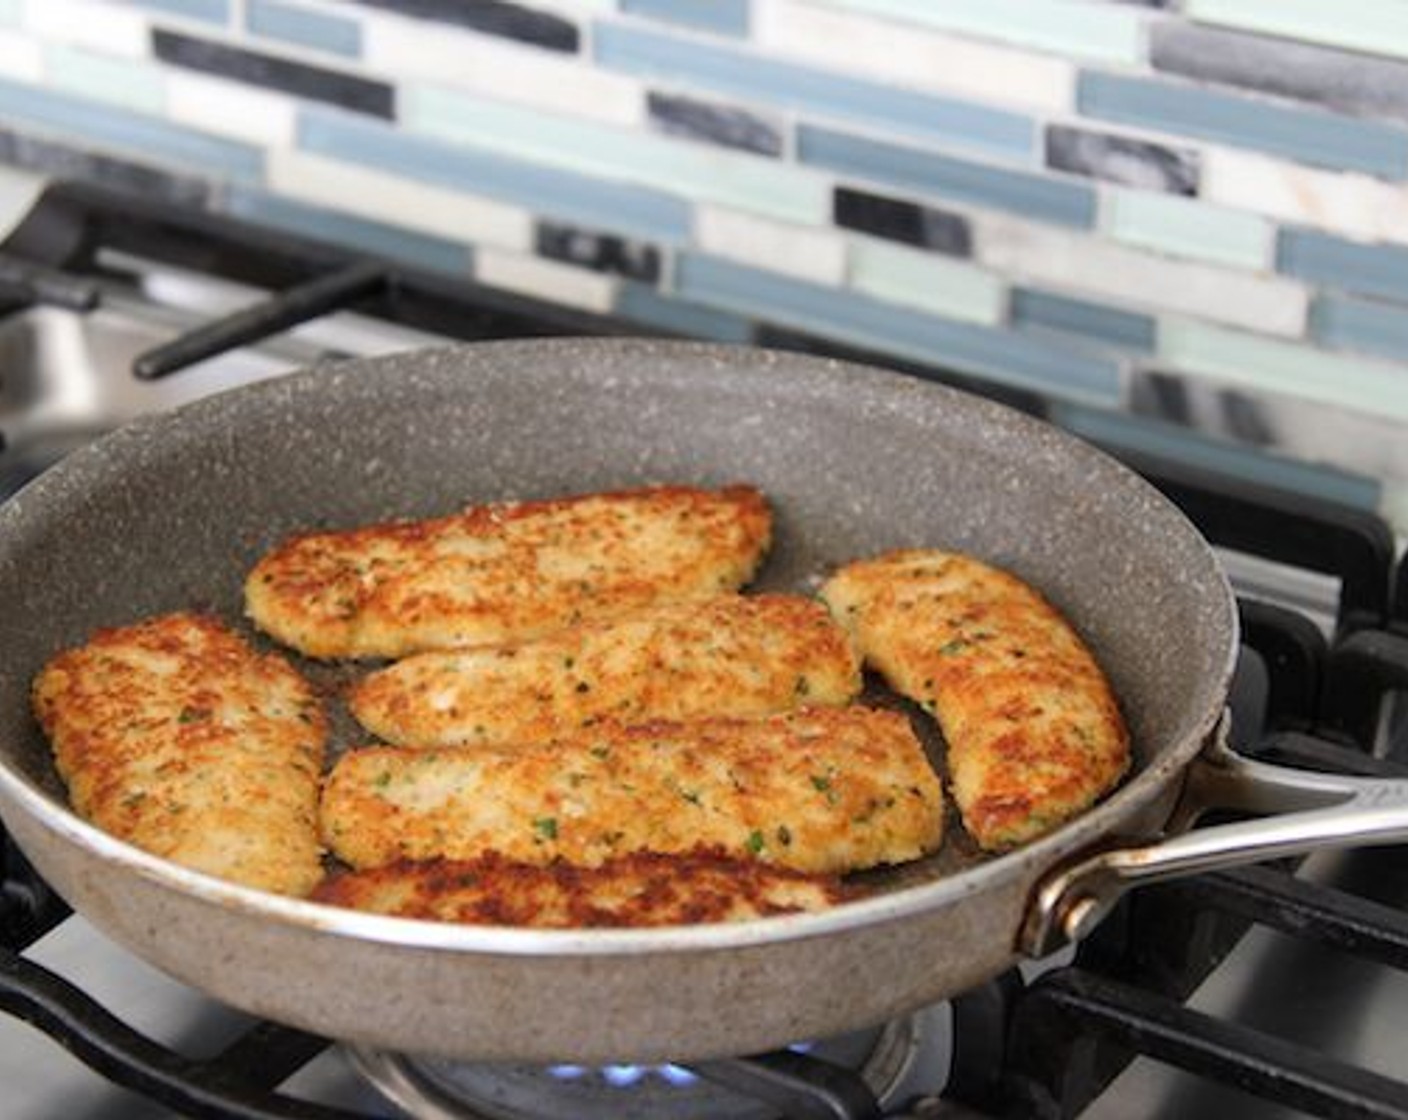 step 8 Heat 1 1/2 – 2 Tablespoons of oil in a large skillet and heat over medium-high heat until shimmering. Add the chicken tenders and cook until the chicken is golden brown on both sides, about 2-4 minutes per side.